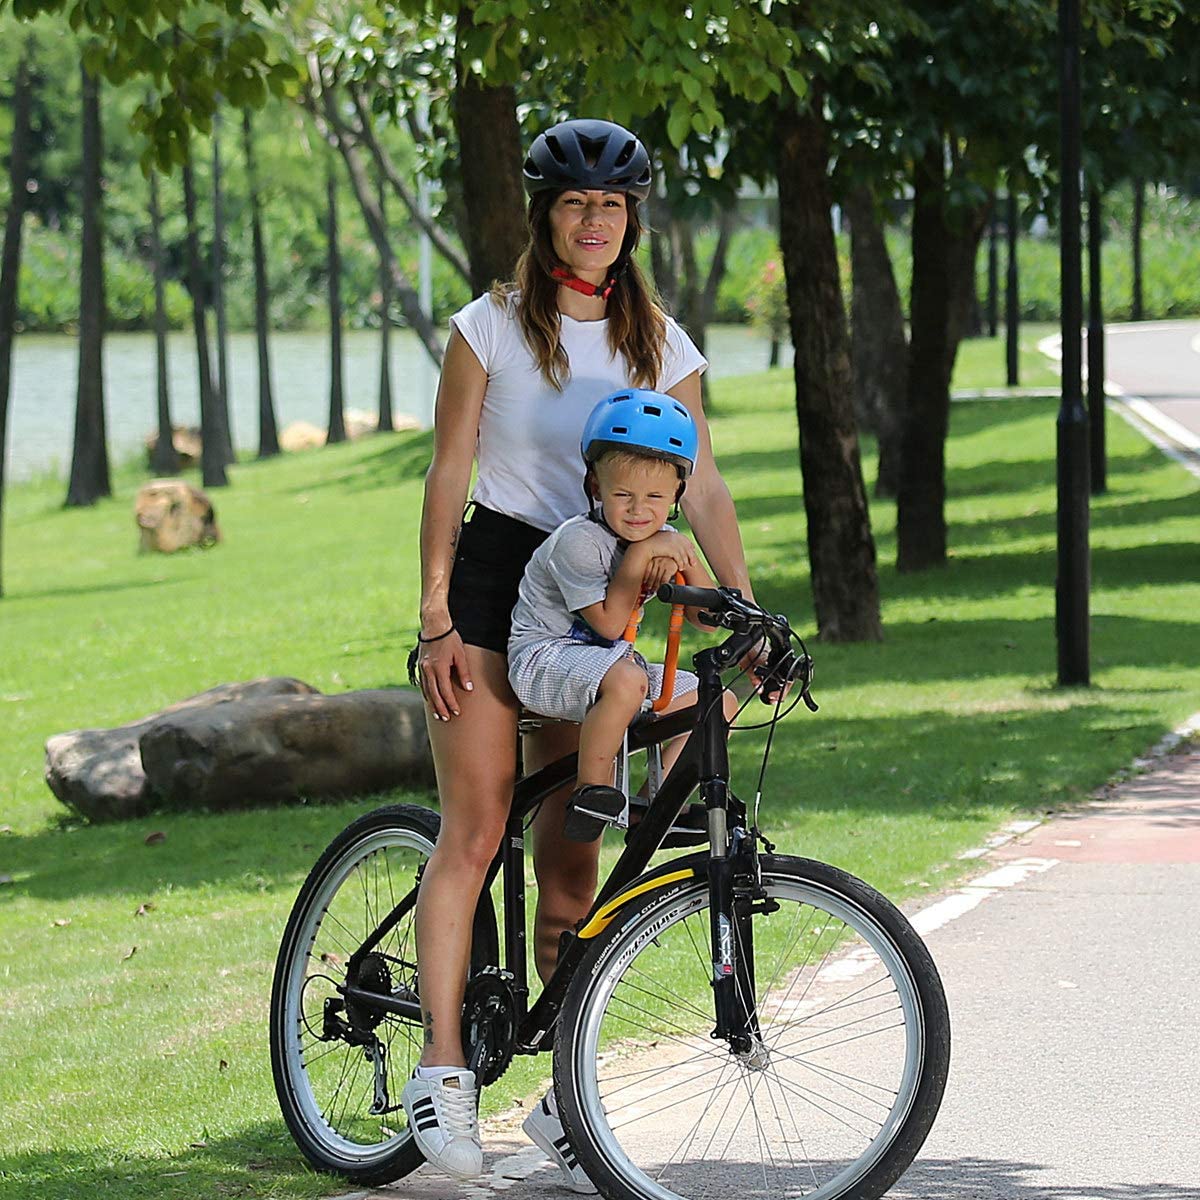 Bicycle Carrier Baby Kids Seat with Handrail Use for Mountain Bikes,Hybrid Bikes,Fitness Bikes Unisex Baby Safety Seat 528